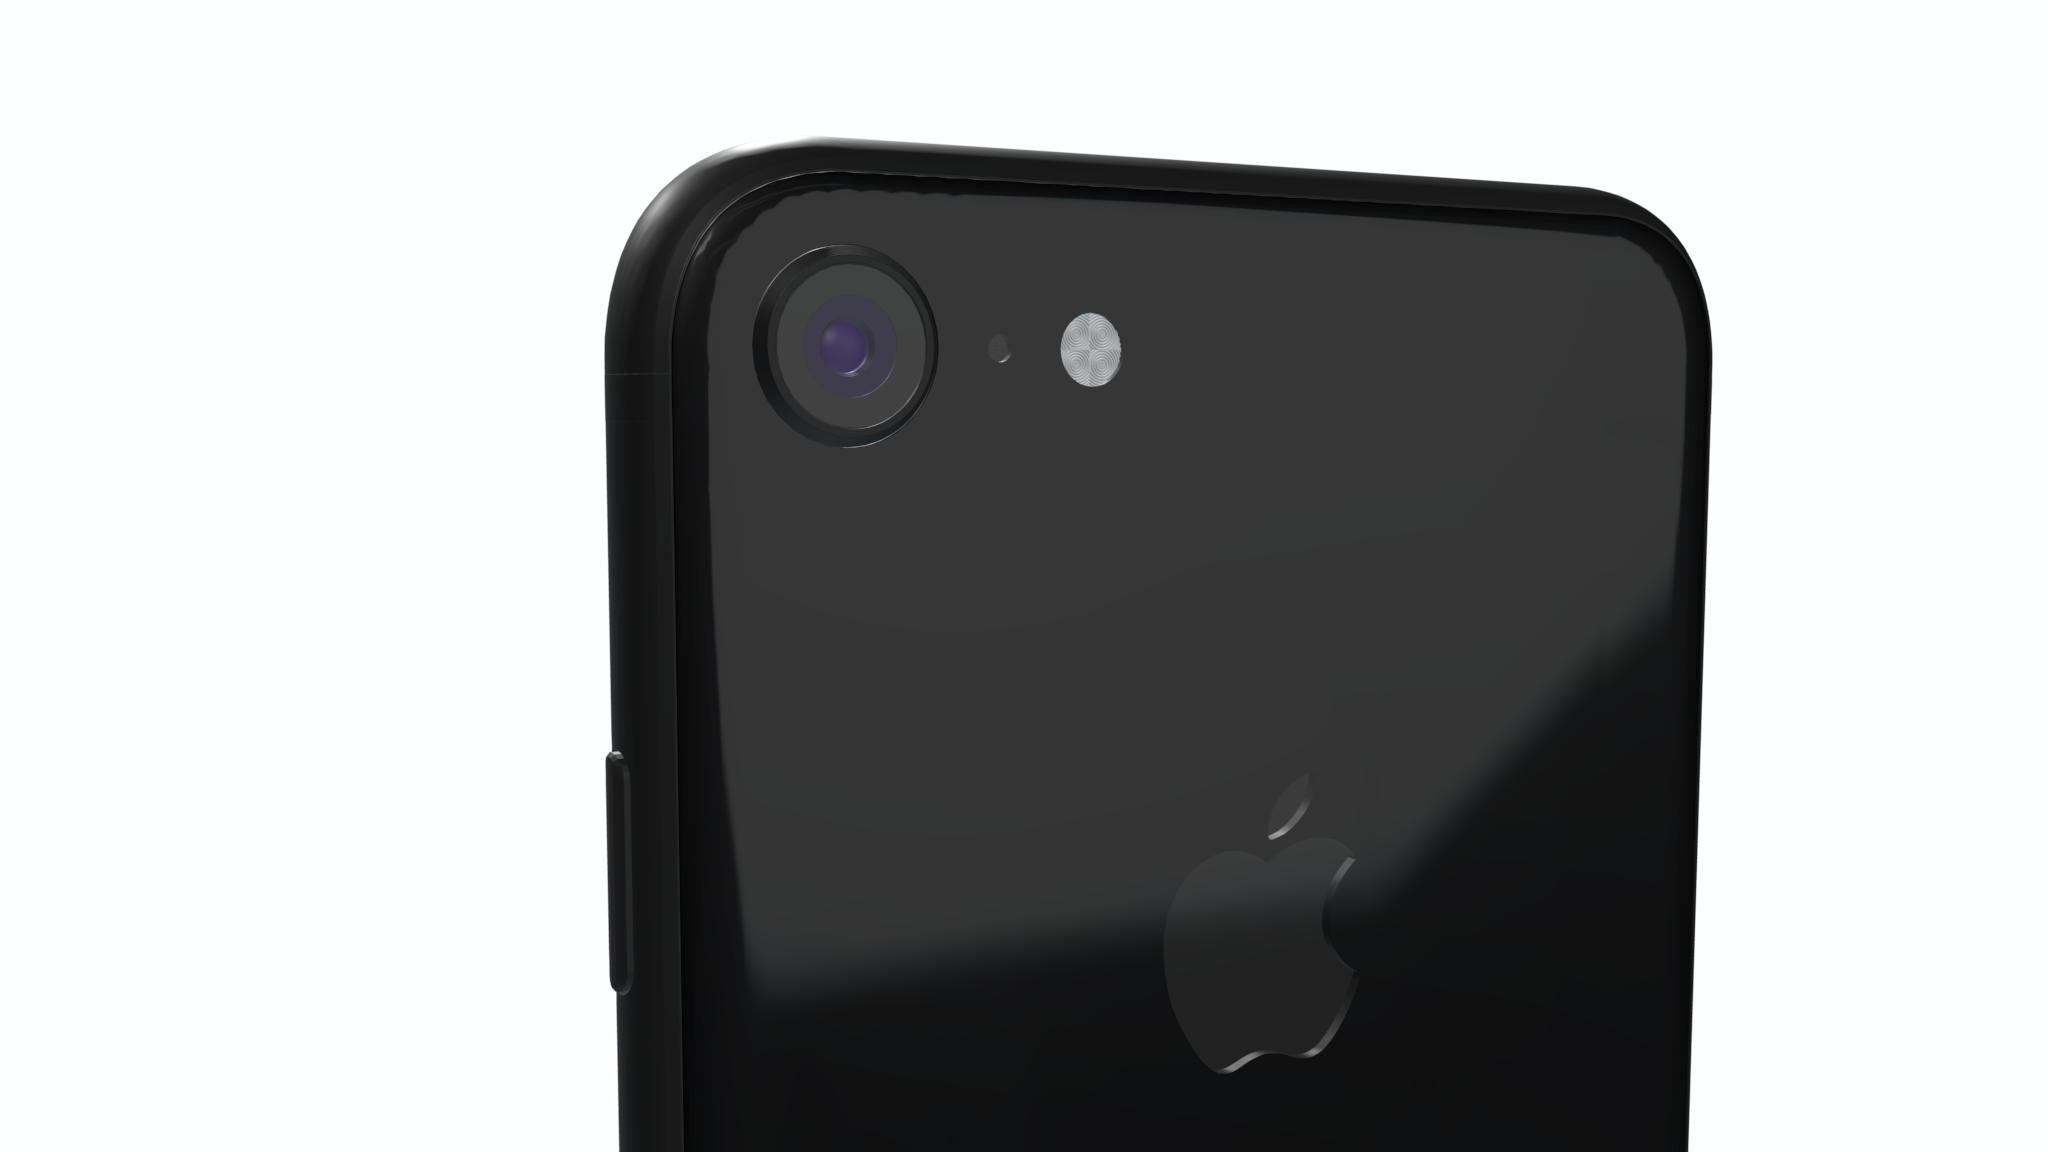 Back of iPhone 8 mockup in black showing a camera